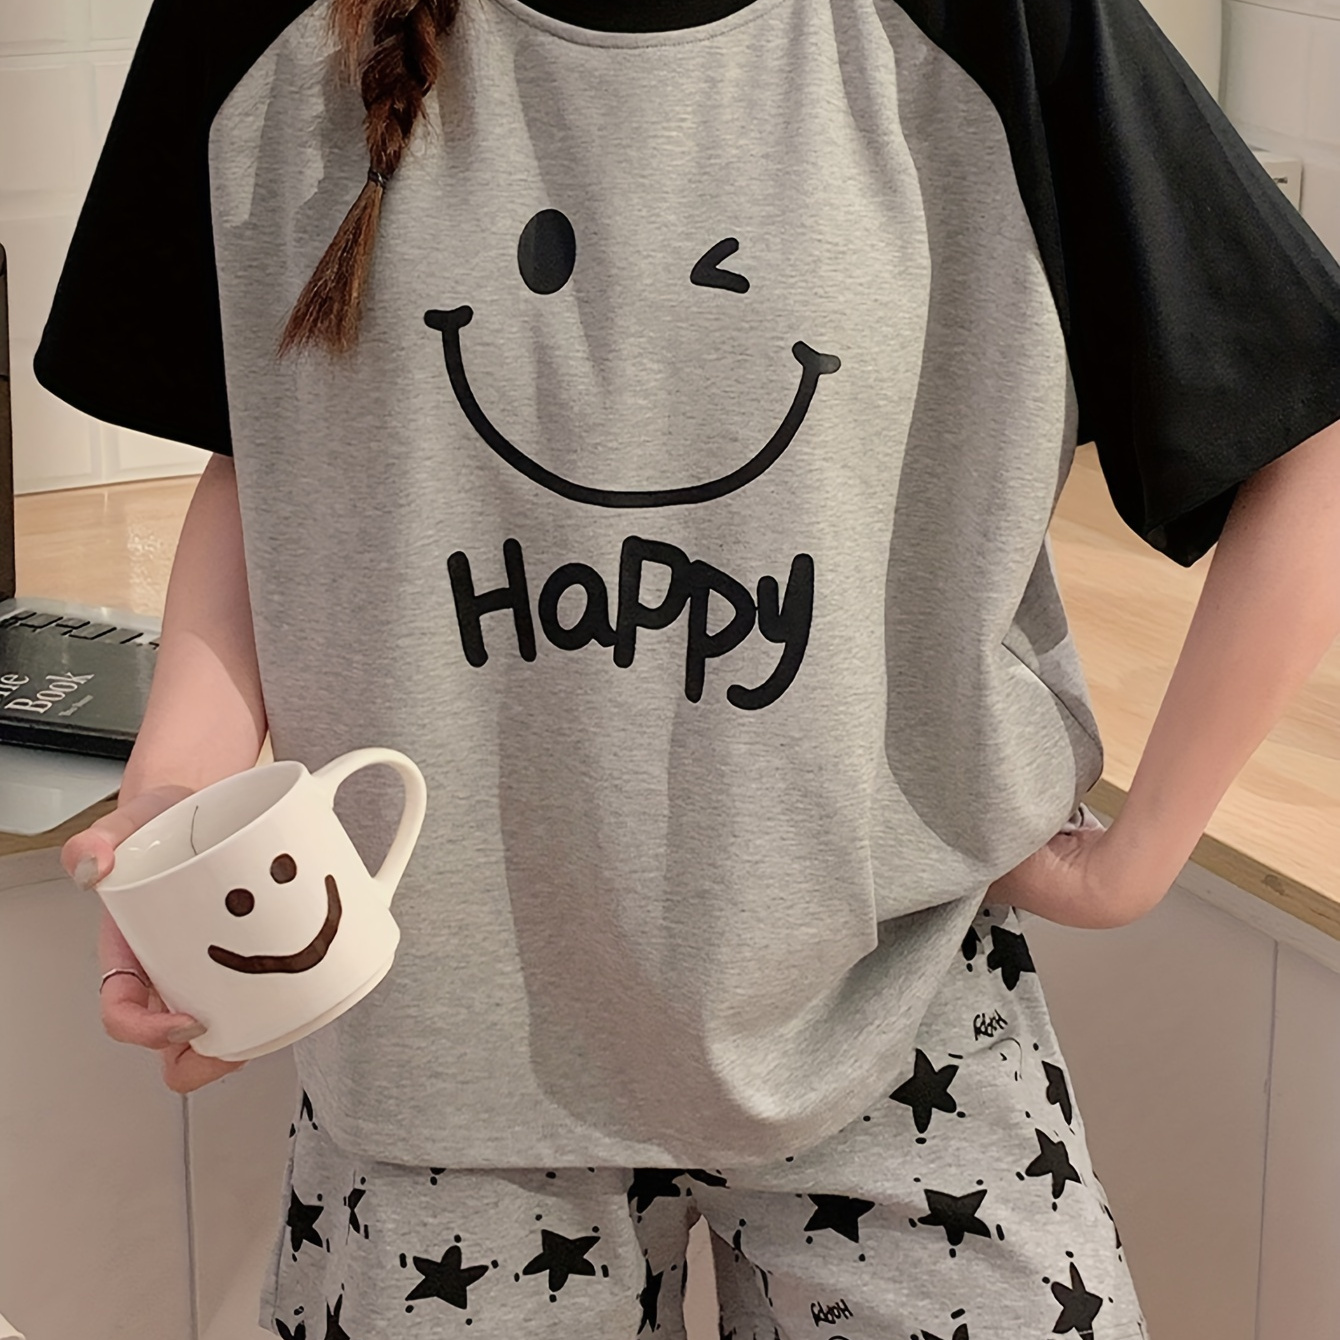 

Women's Smiling Face & Star & Letter Print Casual Lounge Set, Raglan Sleeve Round Neck Top & Shorts, Comfortable Relaxed Fit, Summer Nightwear